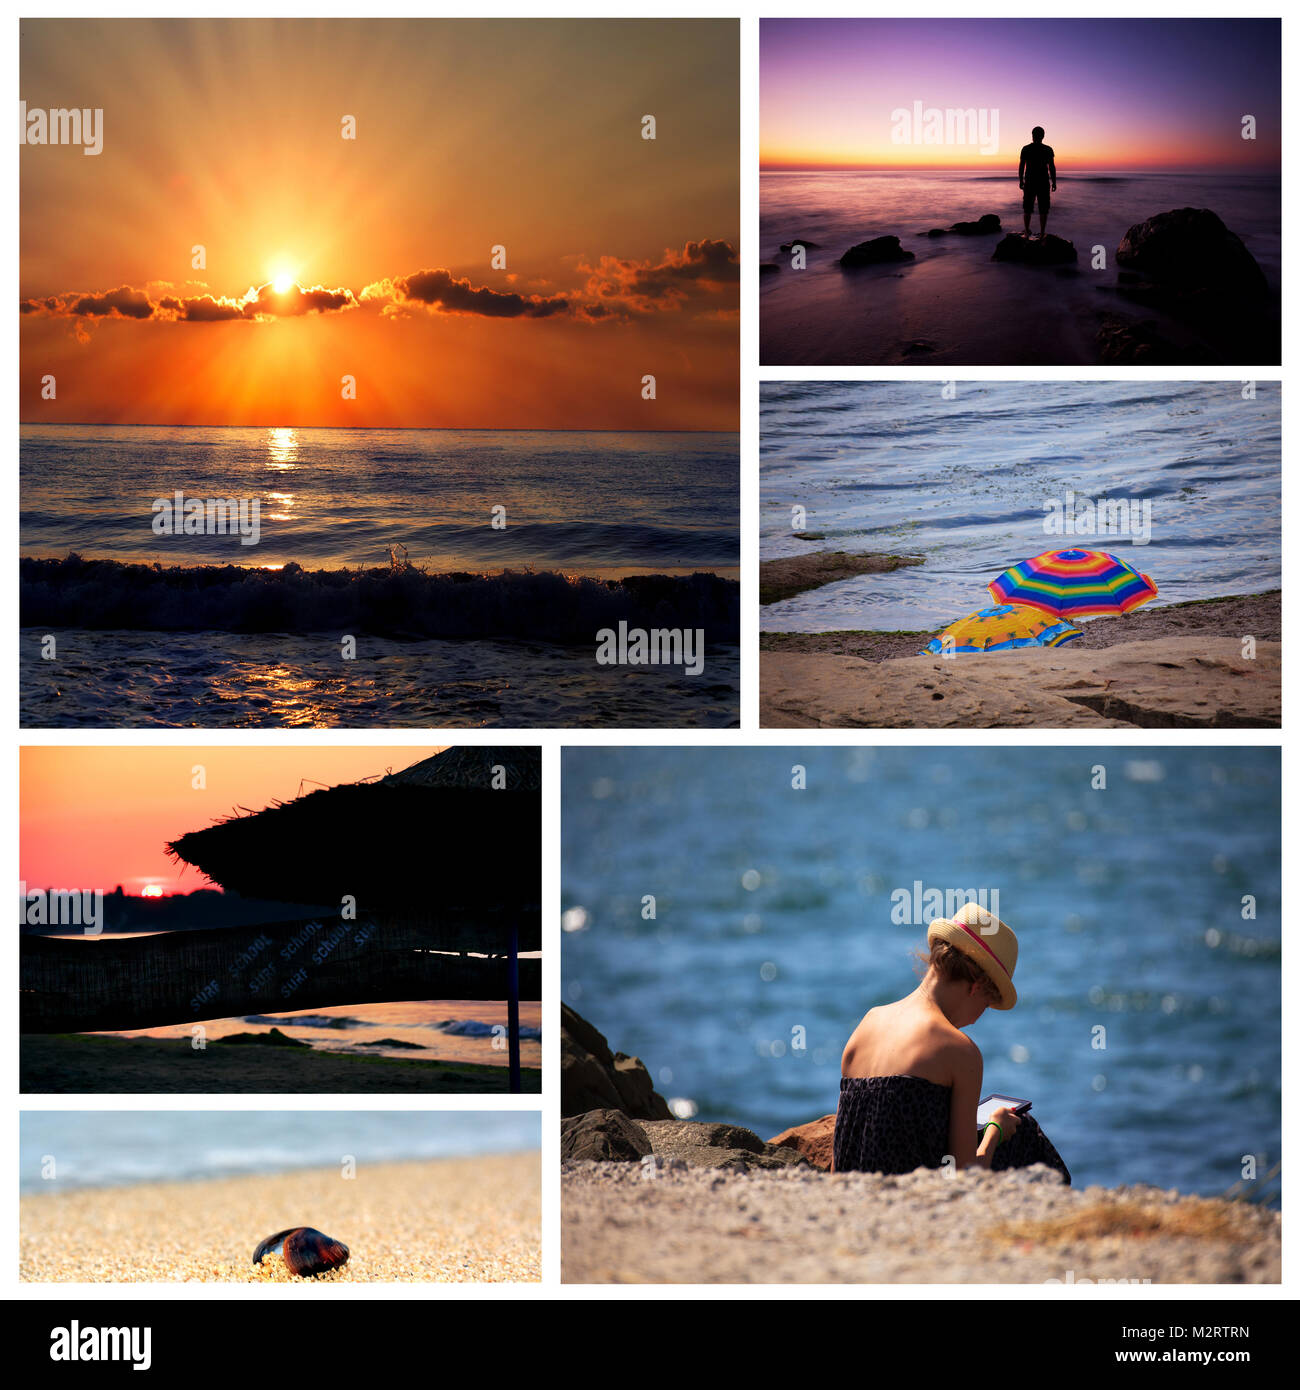 summer vacantion in bulgarian sea conceptual collage from several image Stock Photo